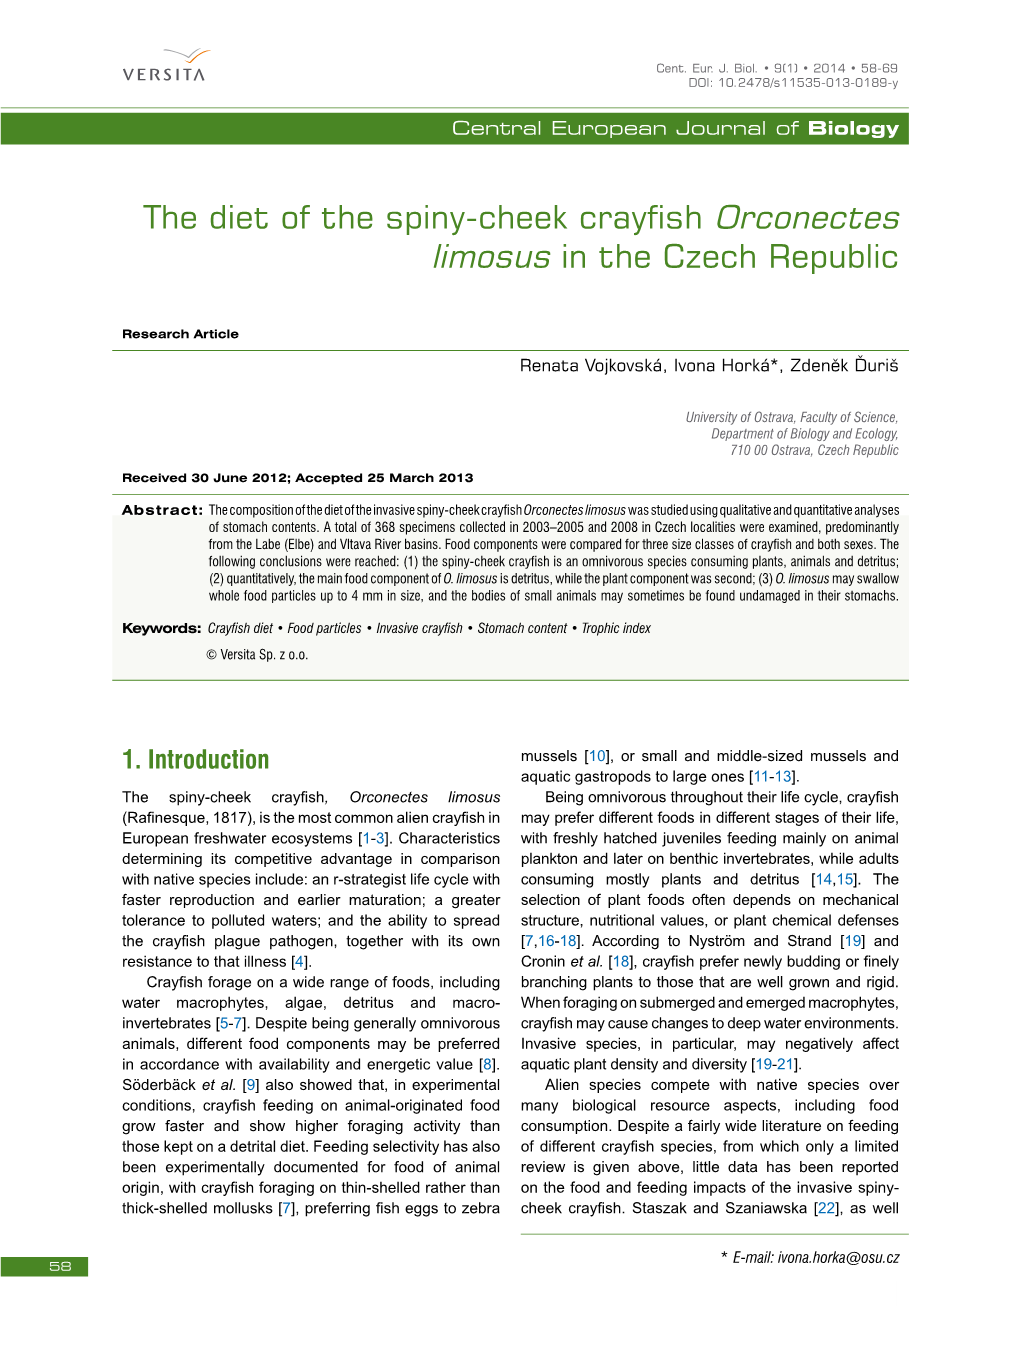 The Diet of the Spiny-Cheek Crayfish Orconectes